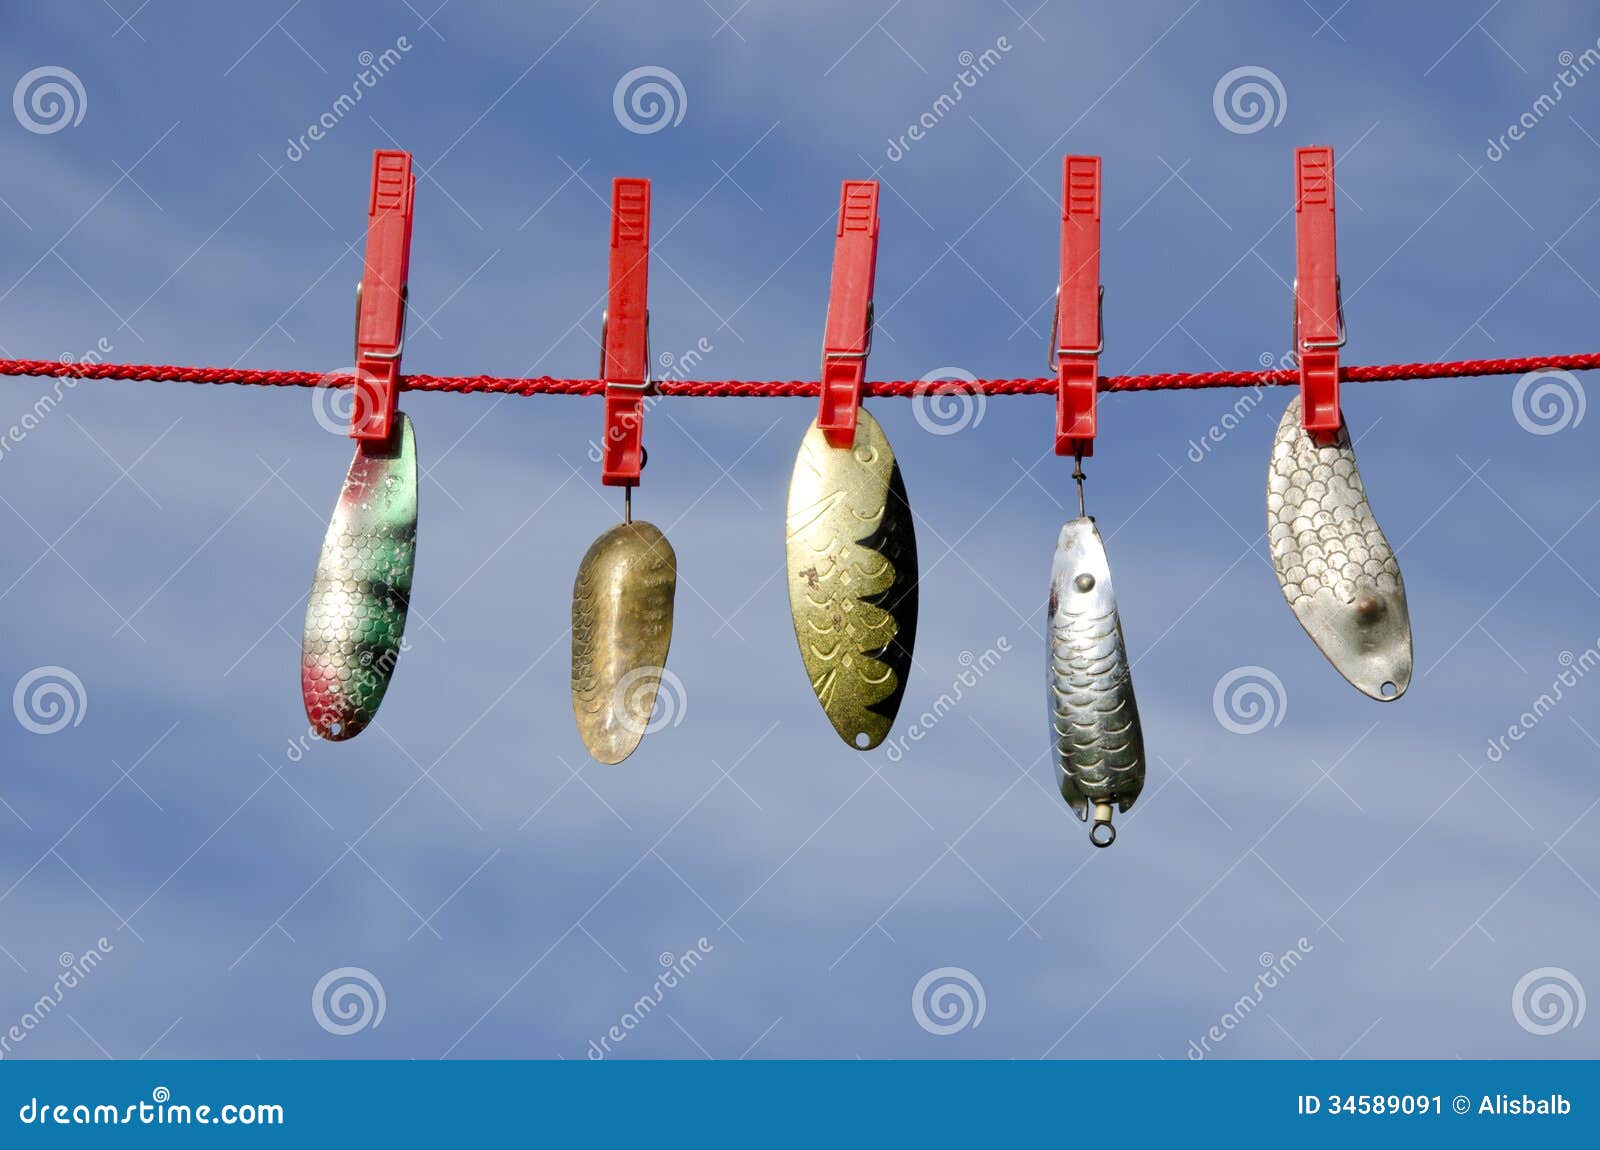 https://thumbs.dreamstime.com/z/various-vintage-metal-lures-spoons-cloth-string-sky-background-fishing-concept-34589091.jpg